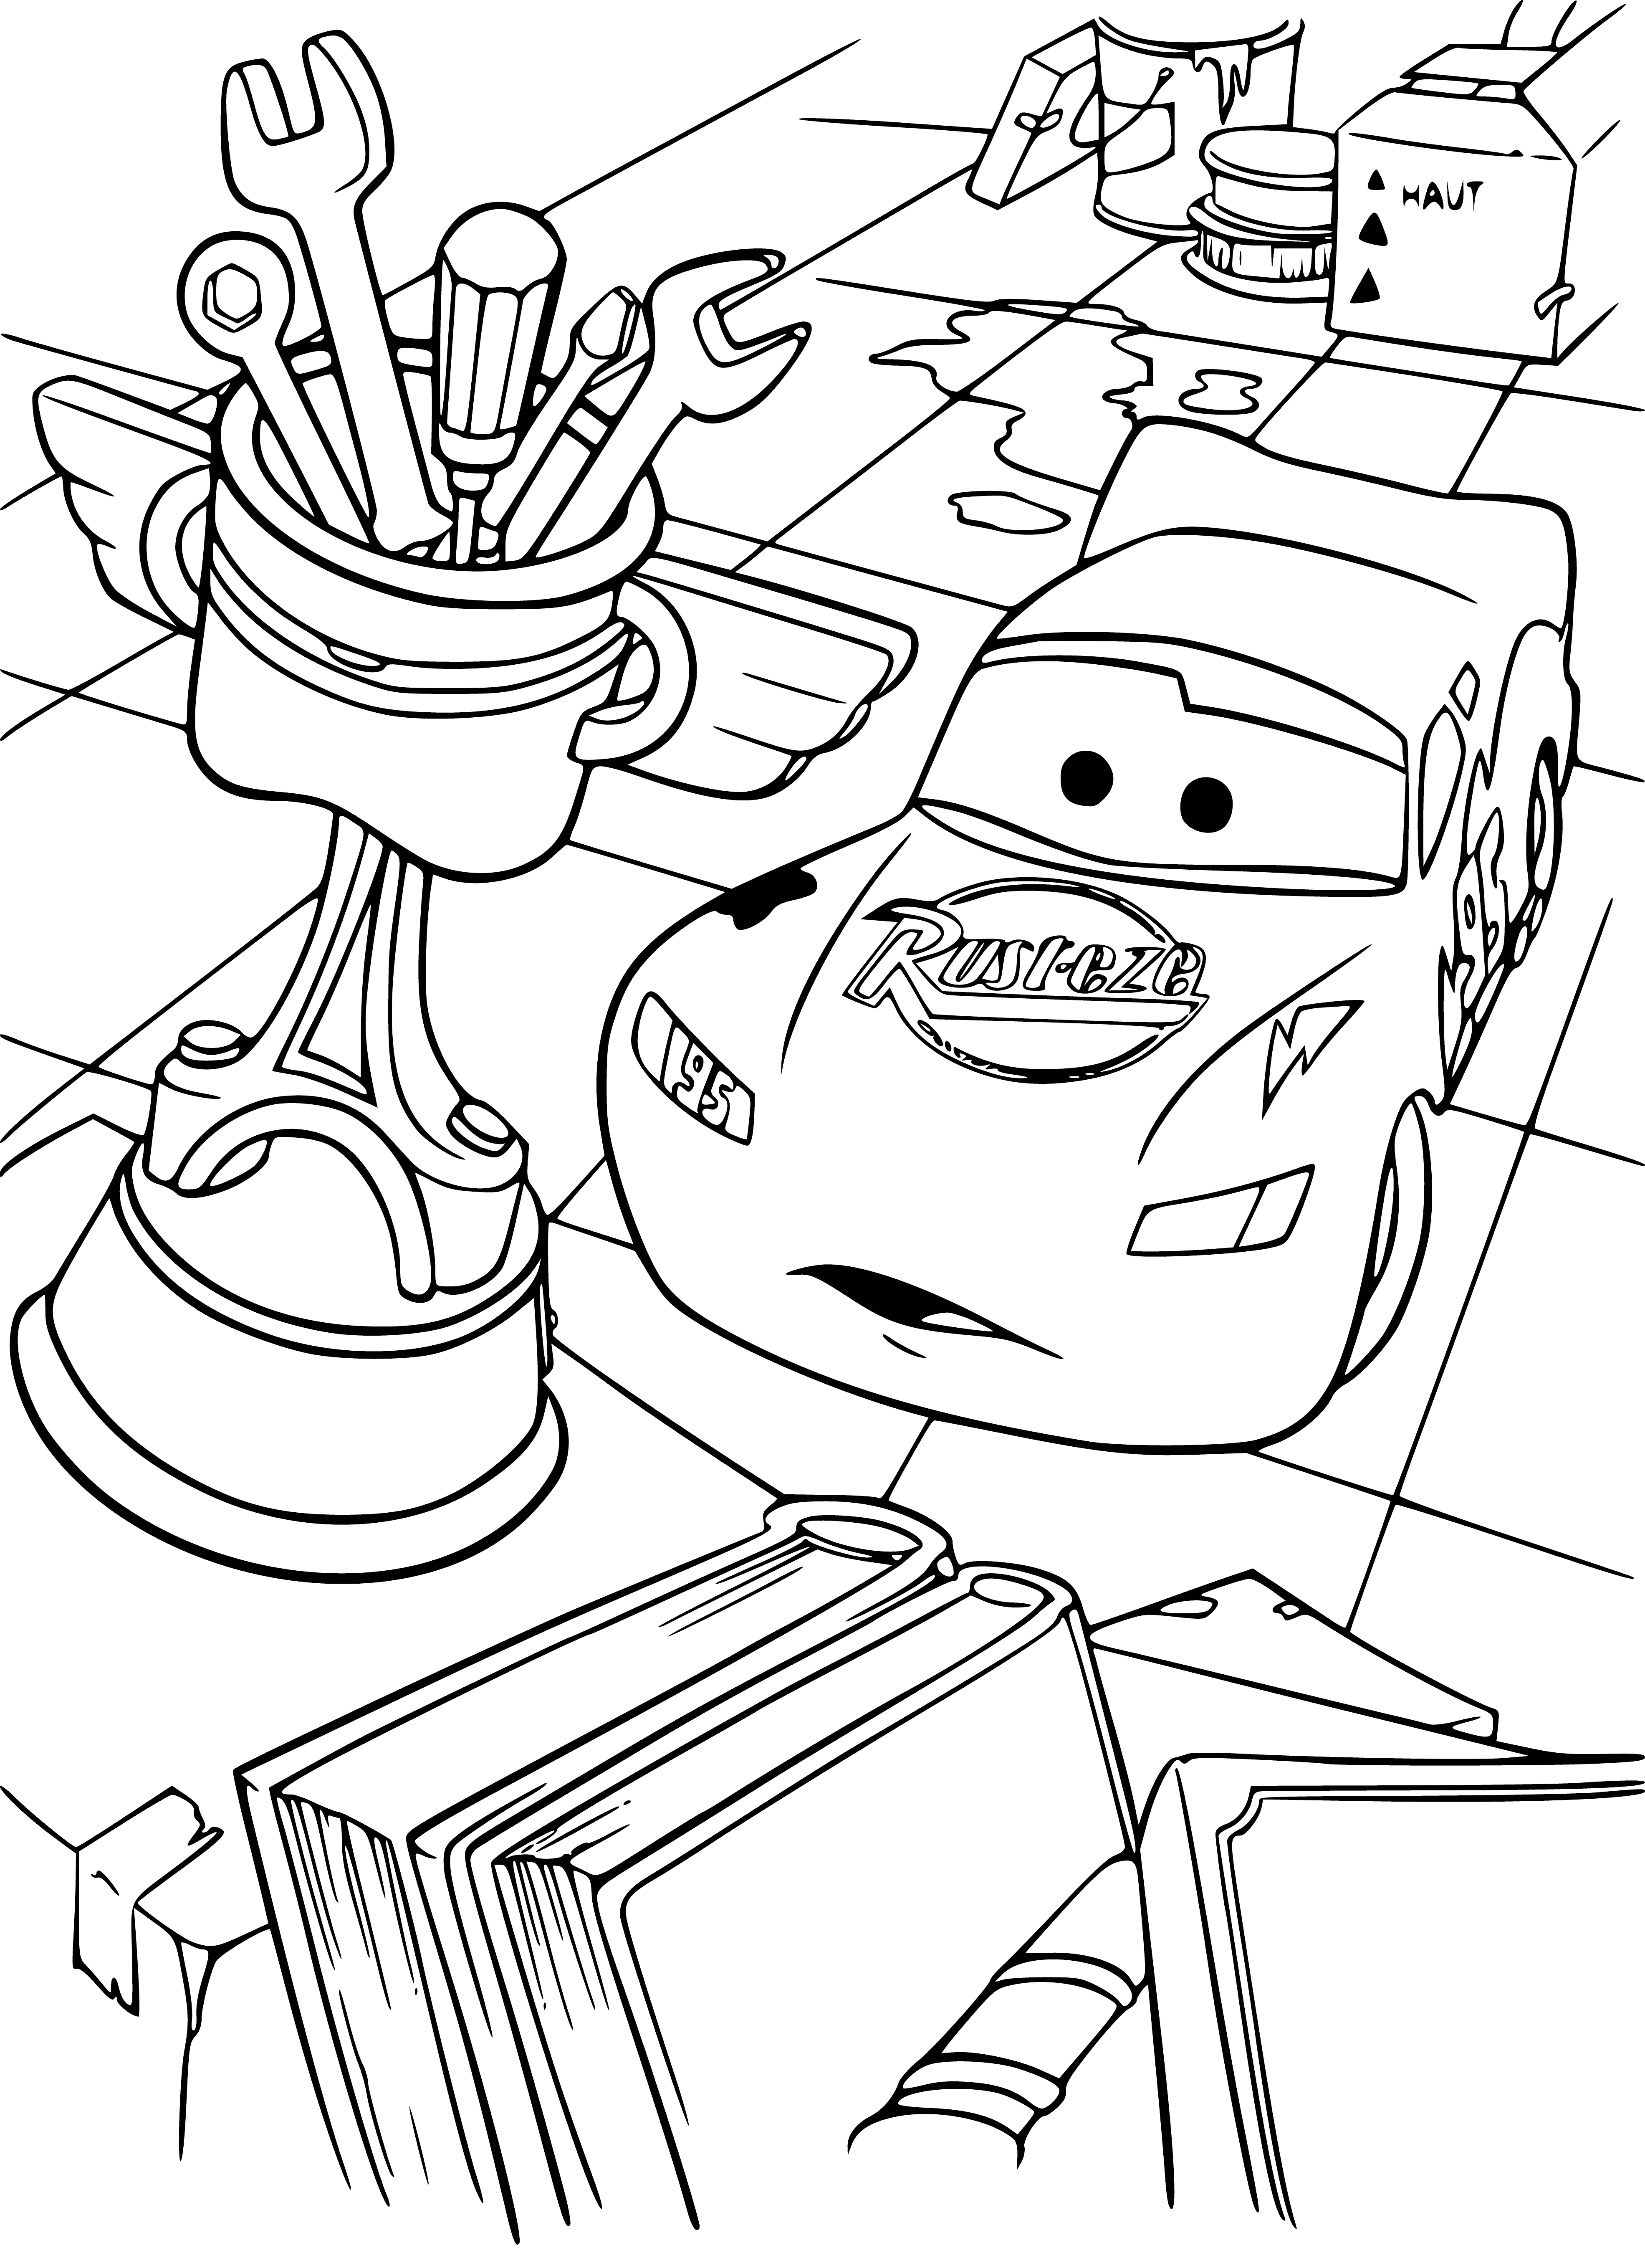 Hudson Piston Cup coloring page